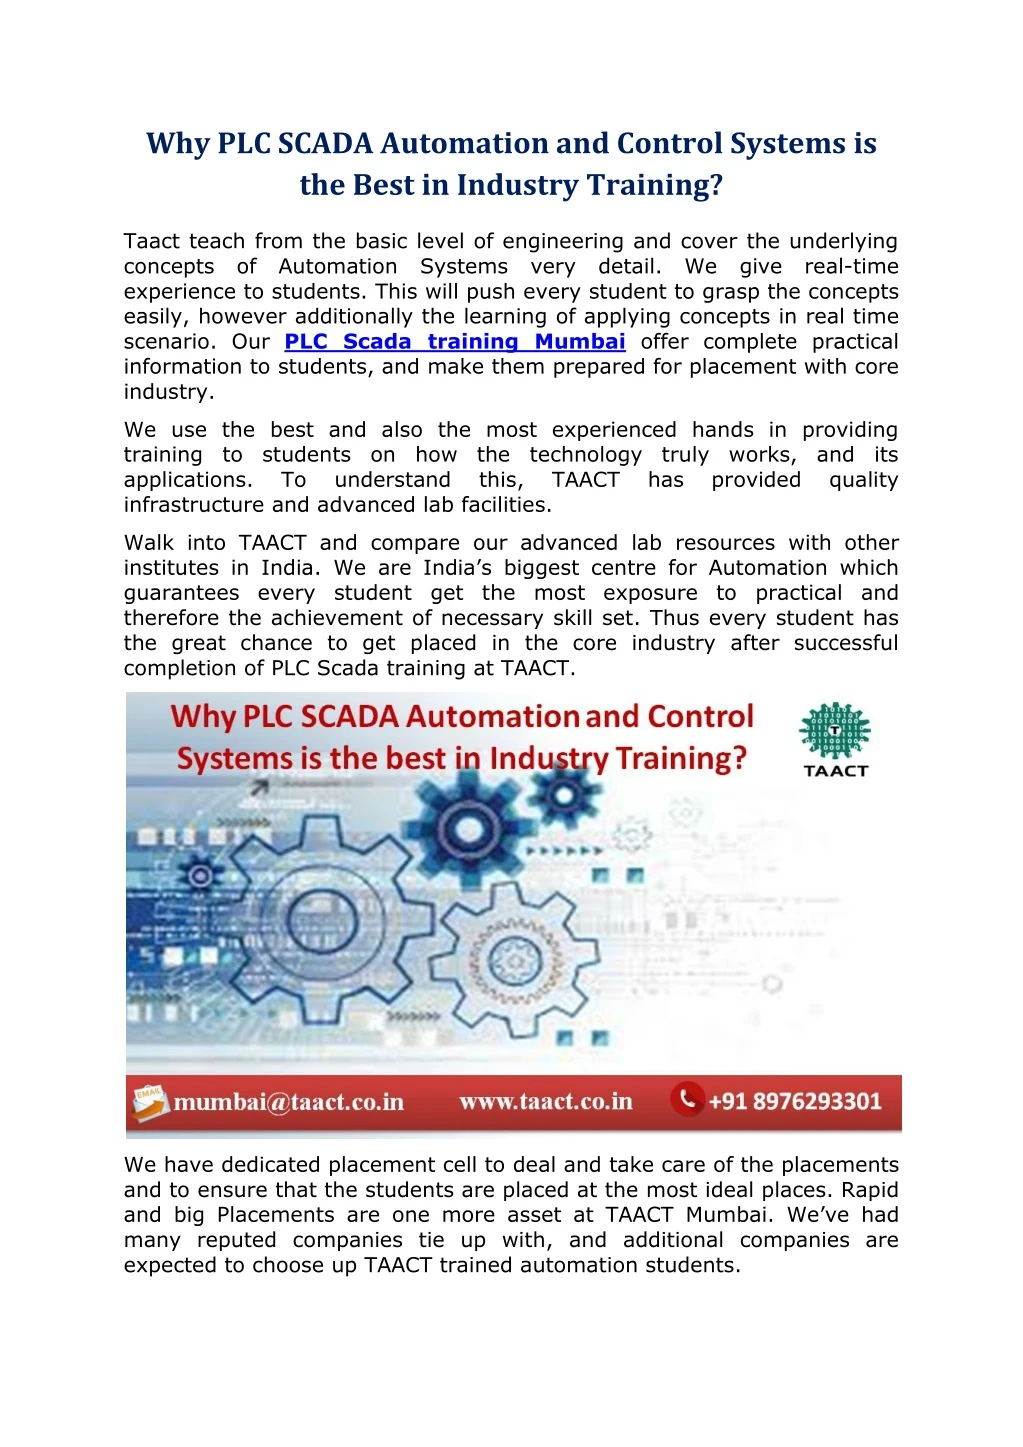 why plc scada automation and control systems